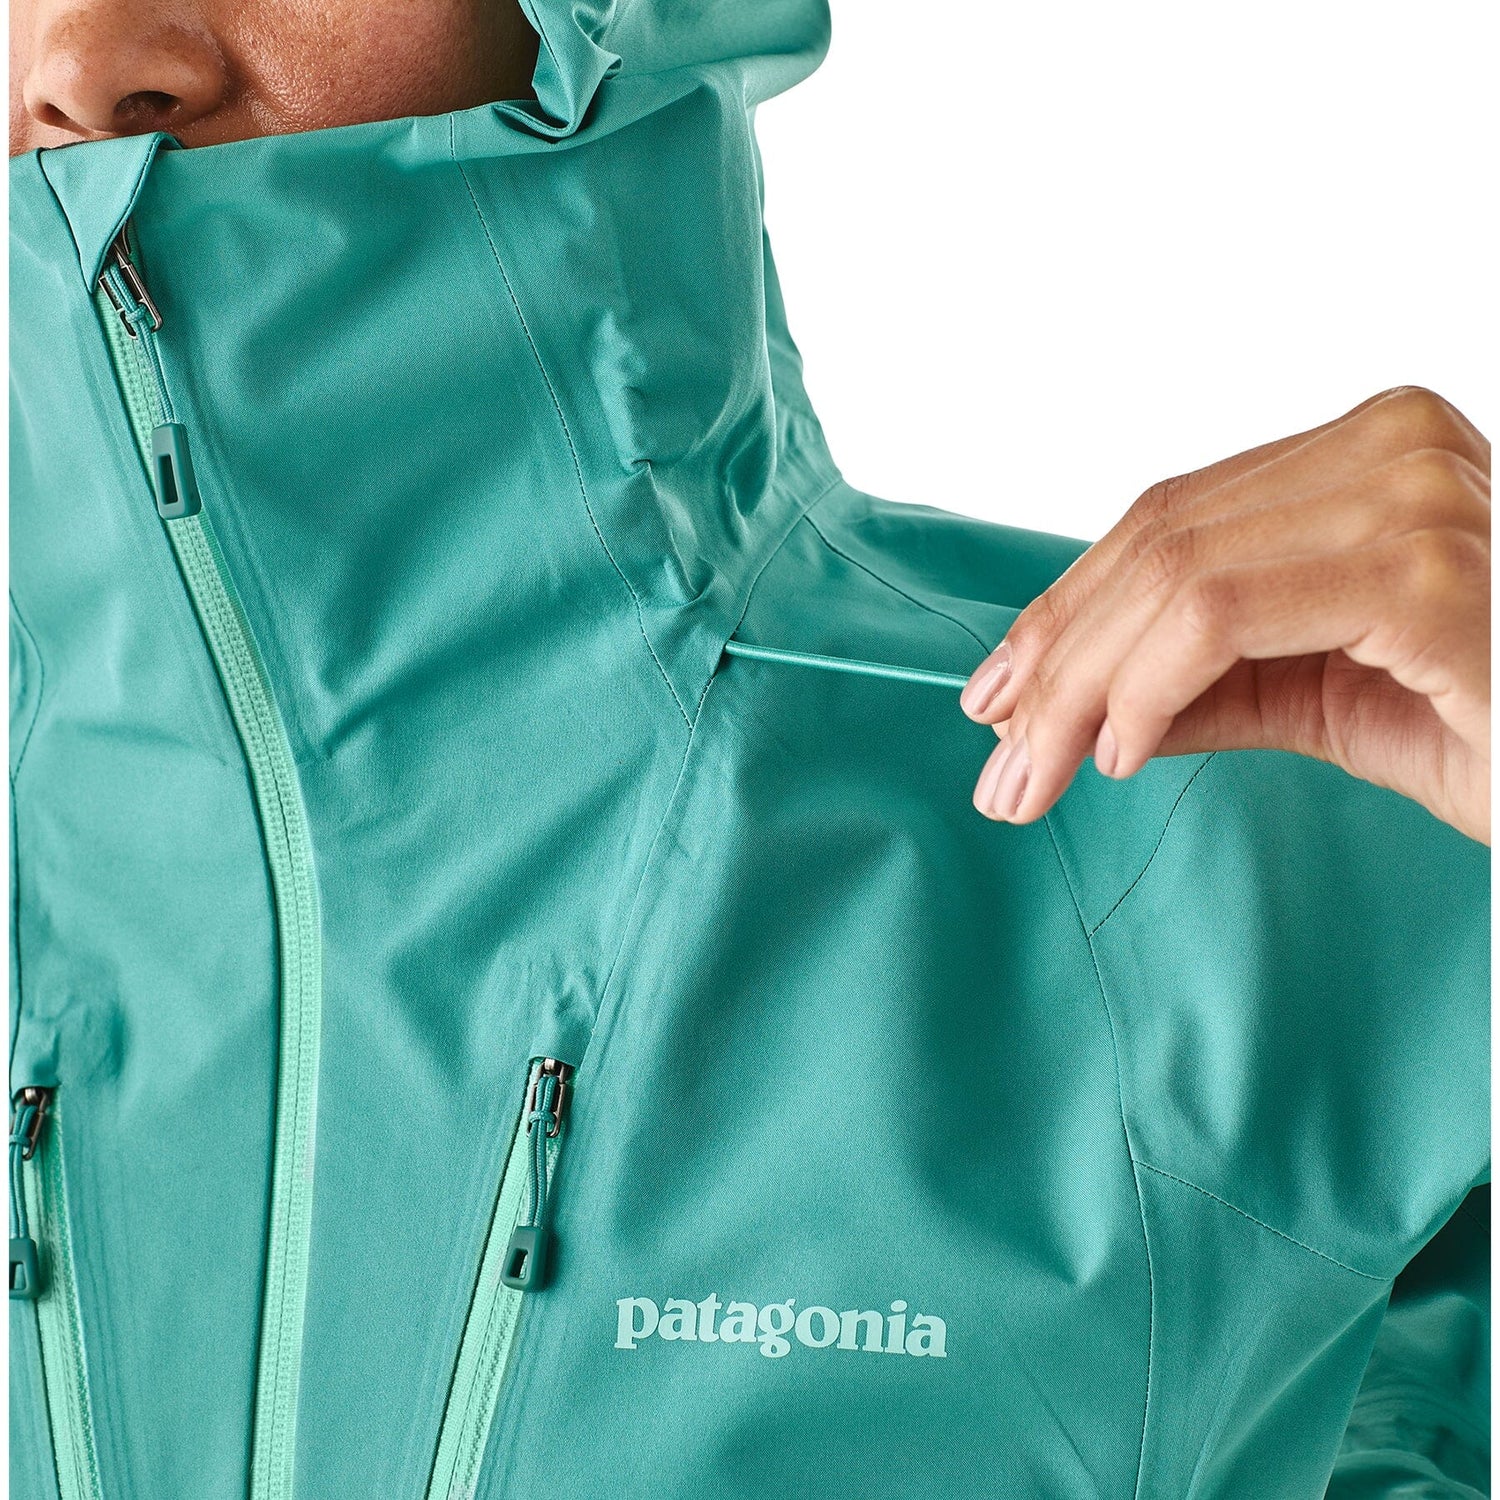 Patagonia W's Triolet Shell Jacket - Recycled Polyester Black Jacket